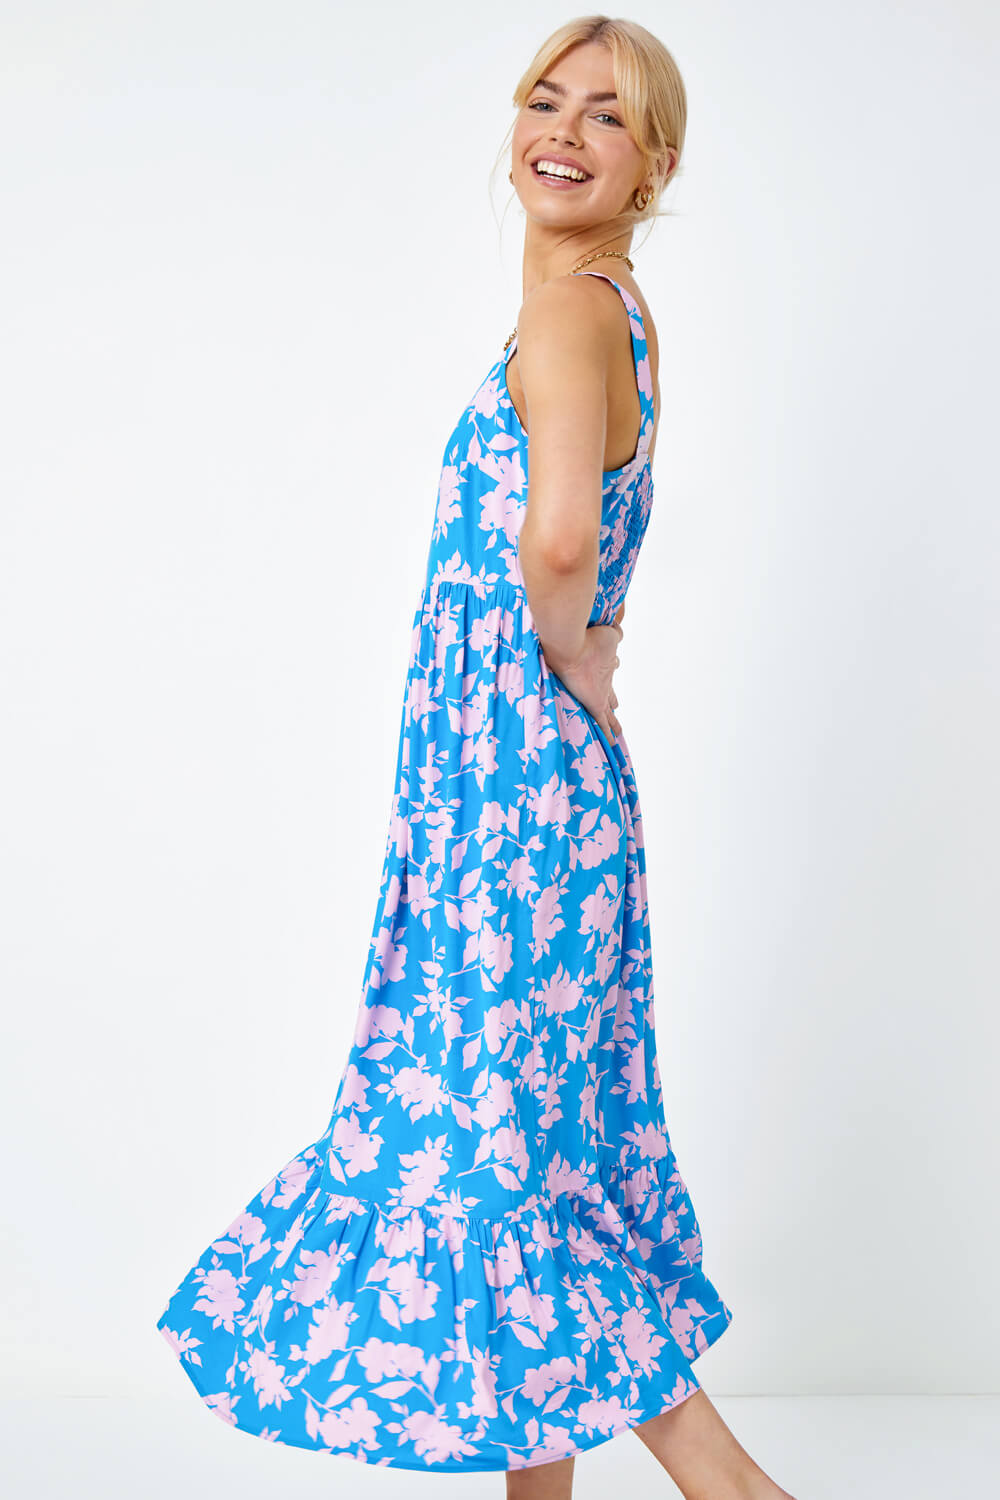 Sky Blue Sleeveless Floral Tiered Midi Dress, Image 4 of 5